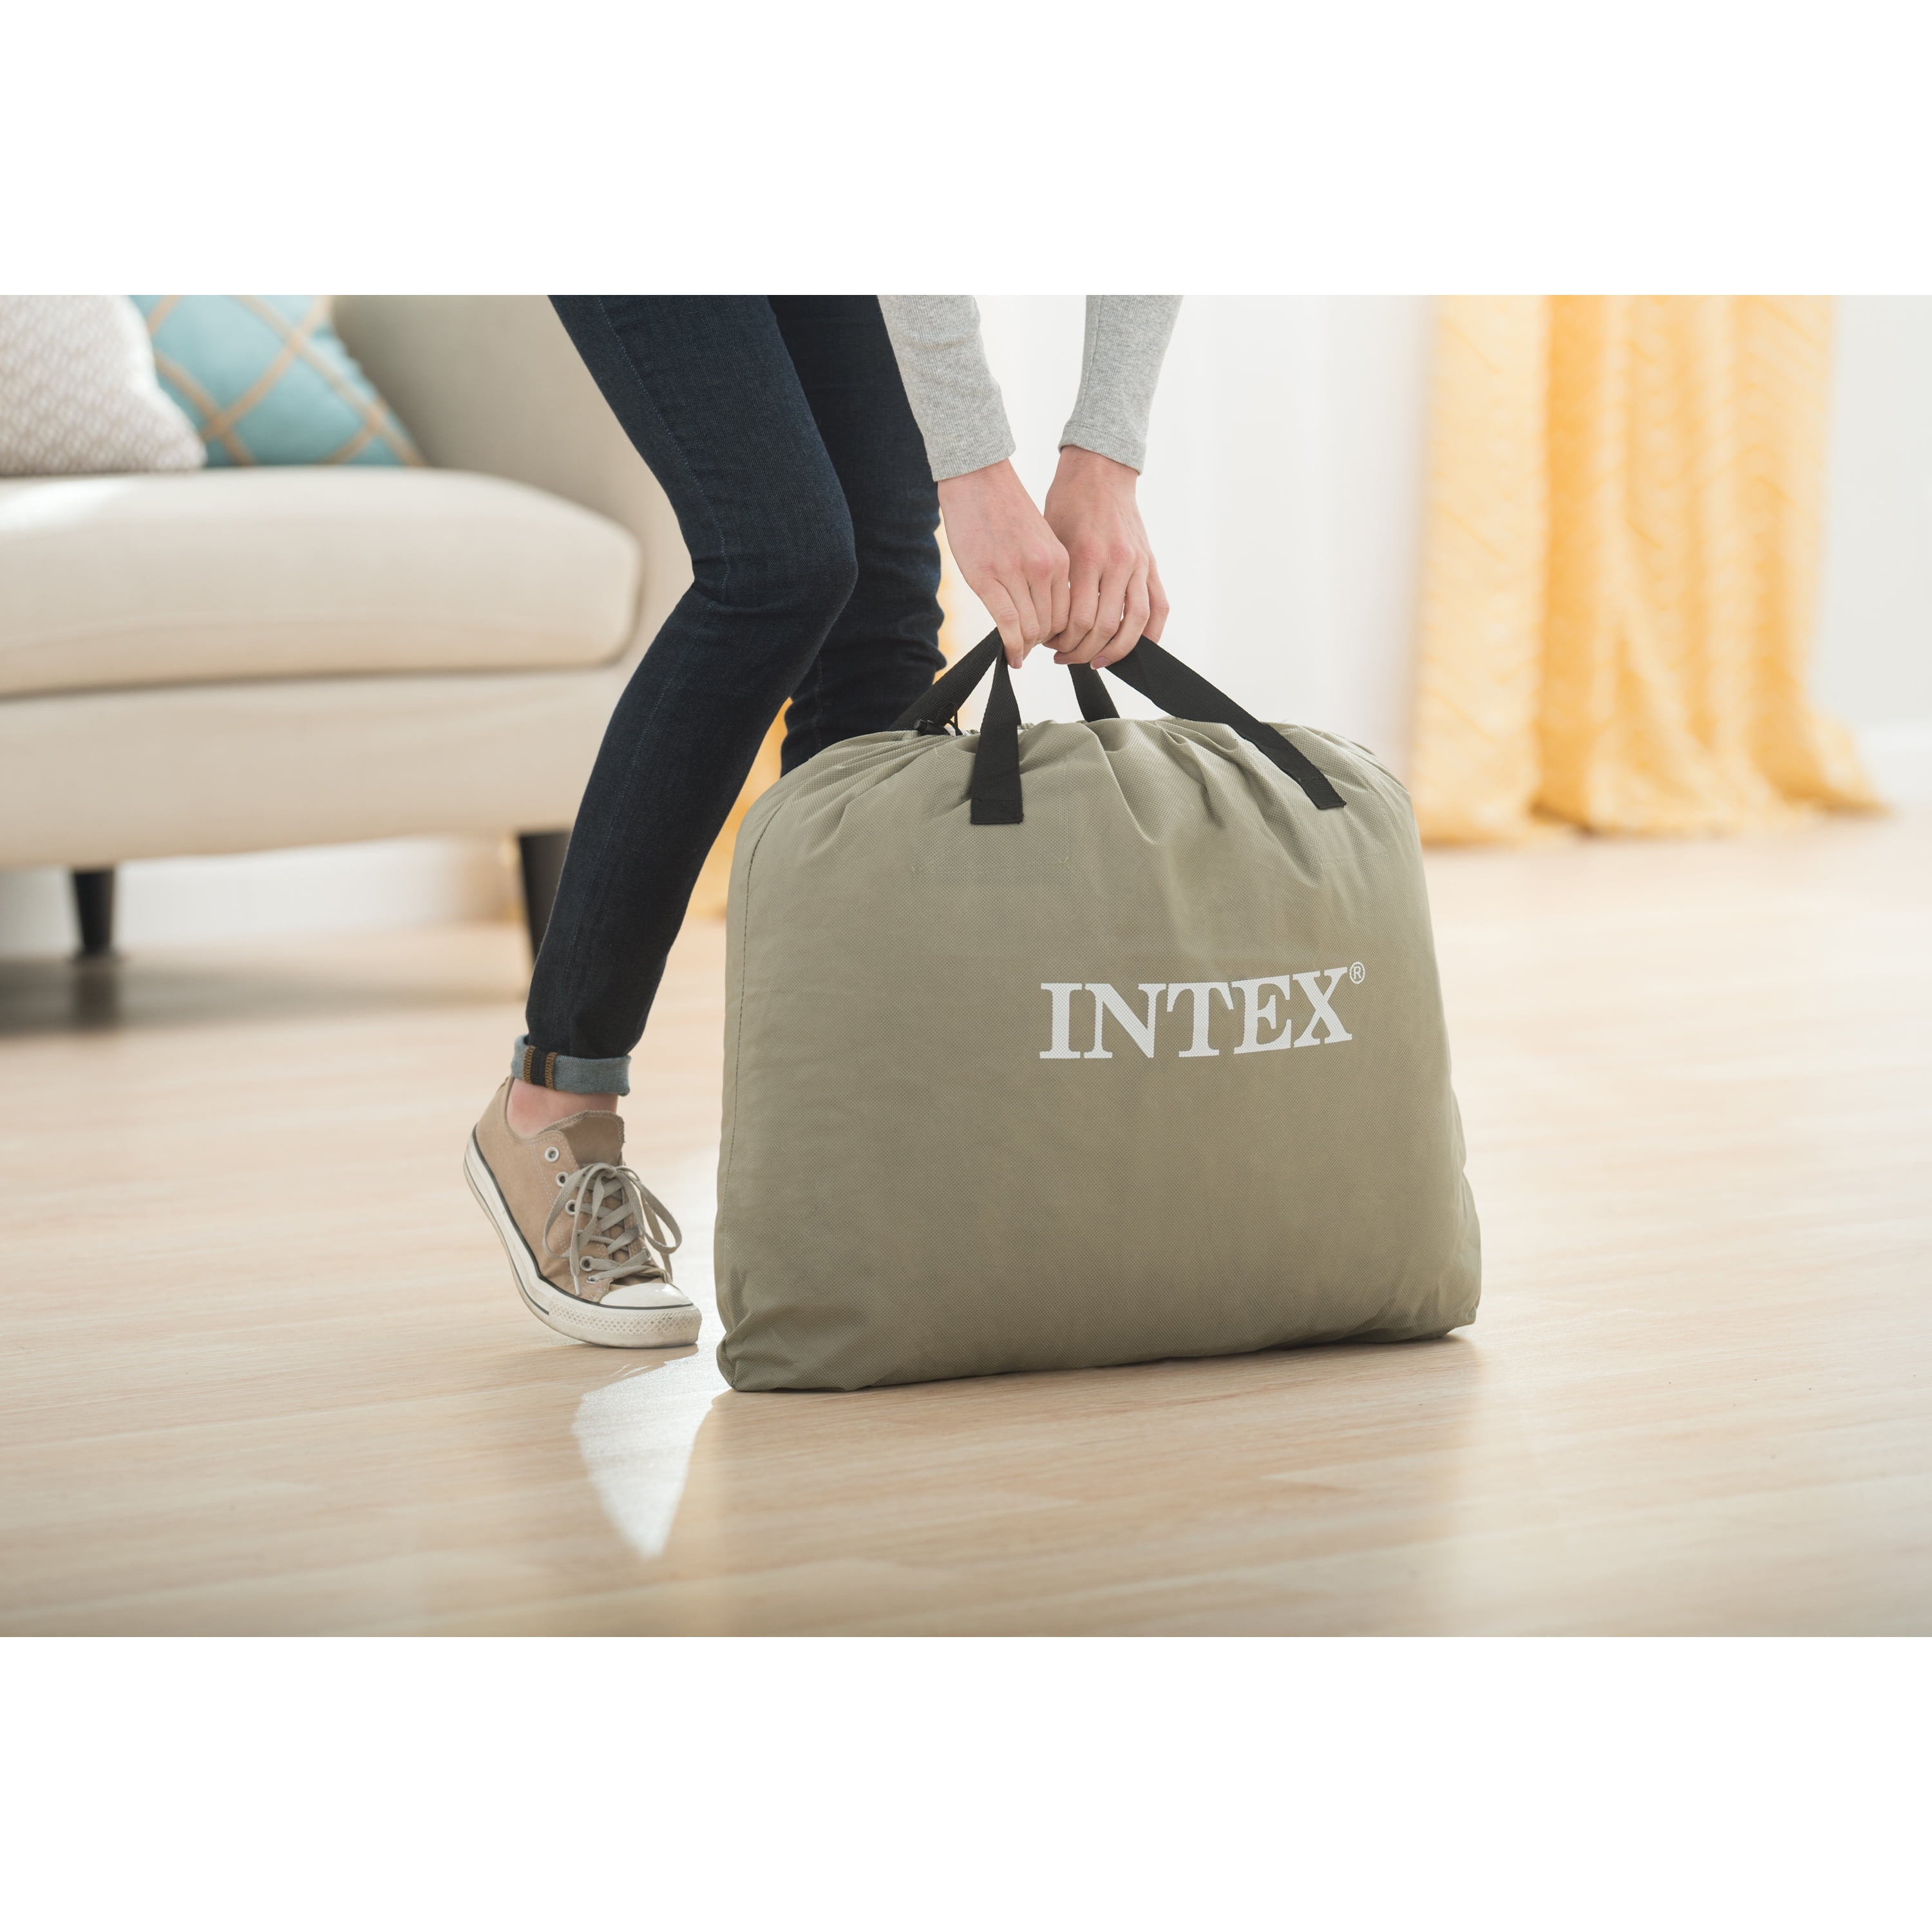 Intex - Pillow Rest Raised Airbed, Twin - 2